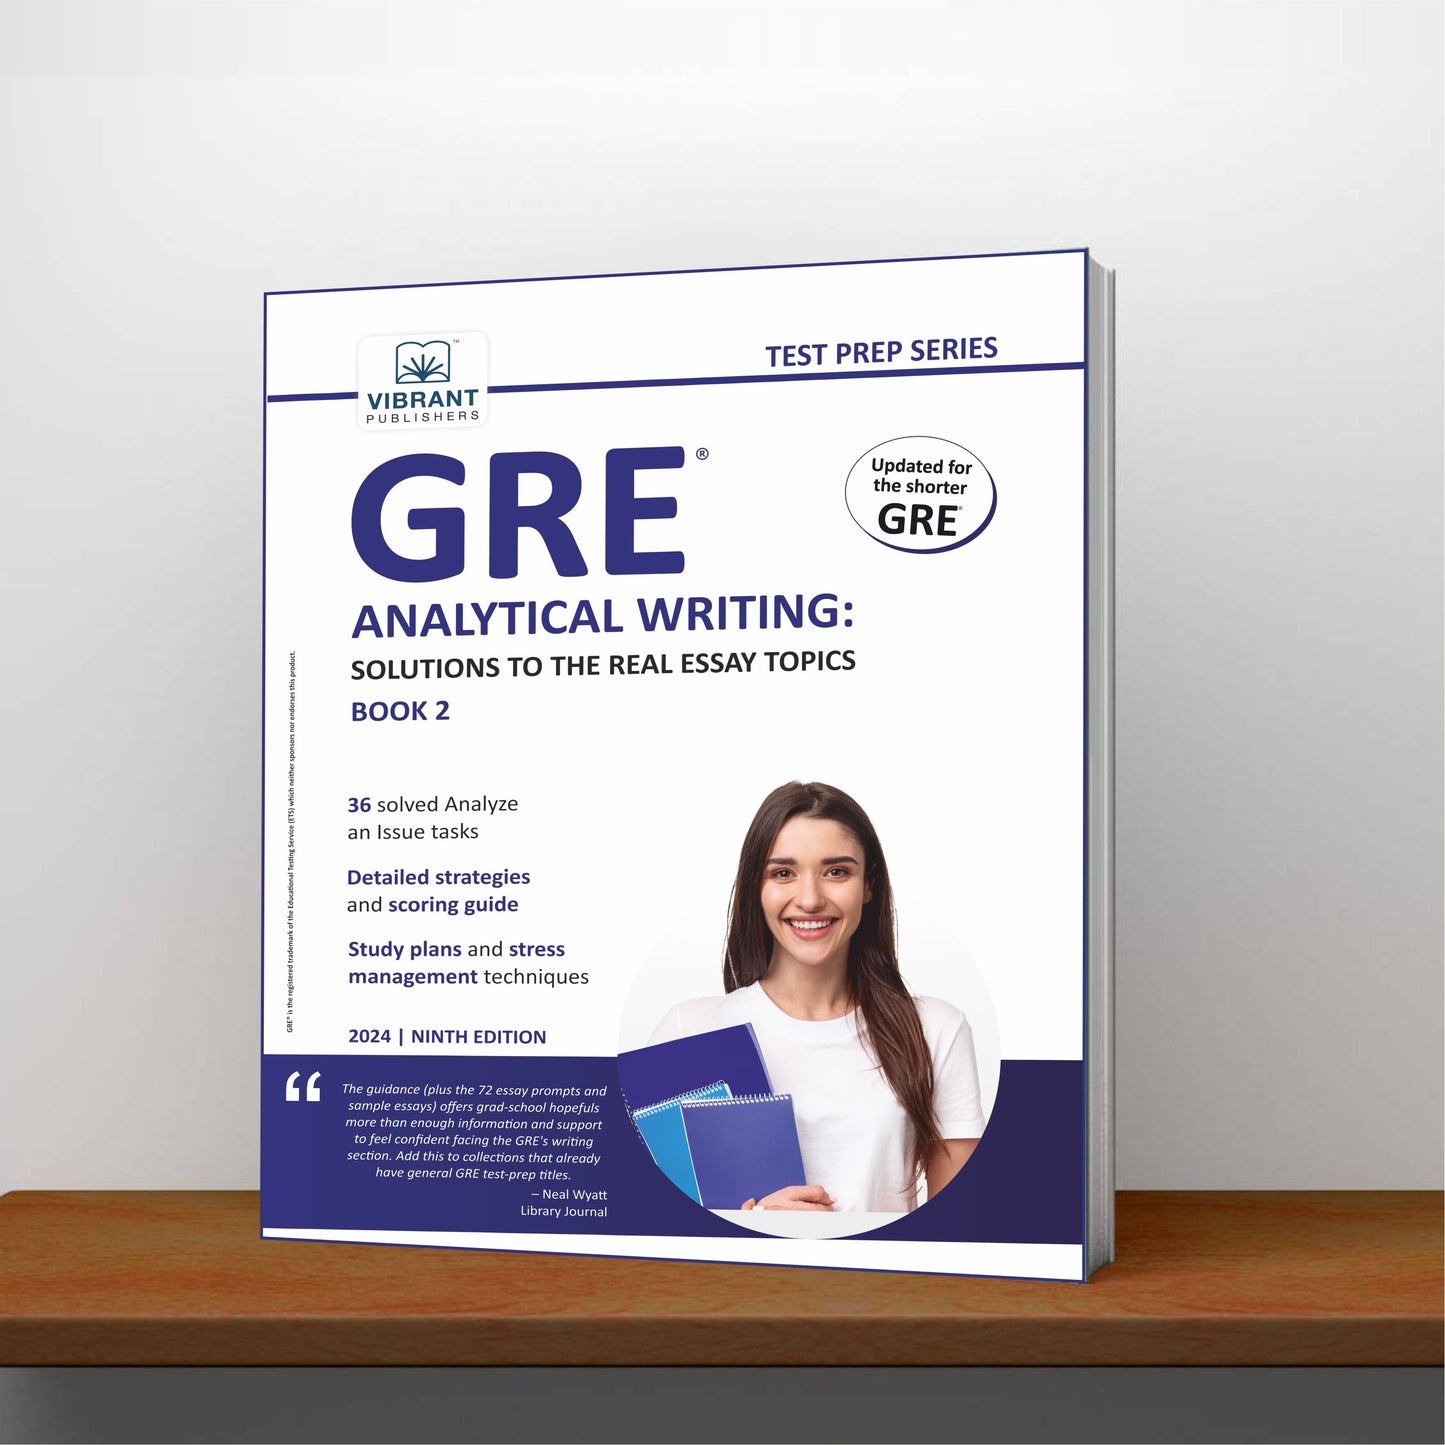 GRE Analytical Writing: Solutions to the Real Essay Topics - Book 2 (2024 Edition)